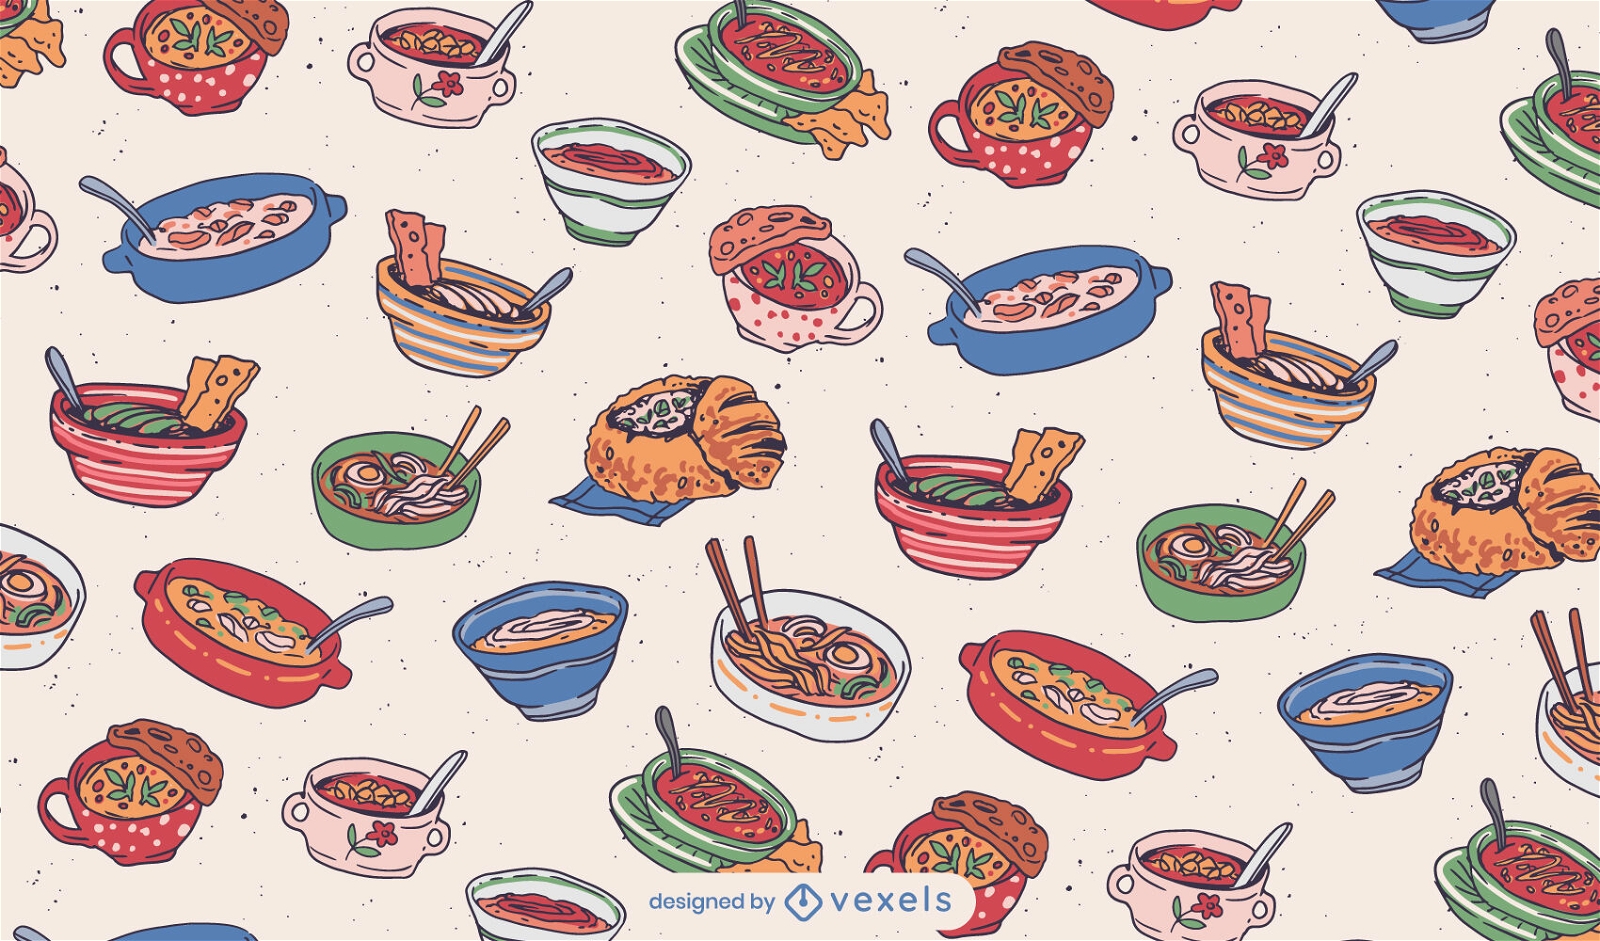 Soup bowls and warm food pattern design